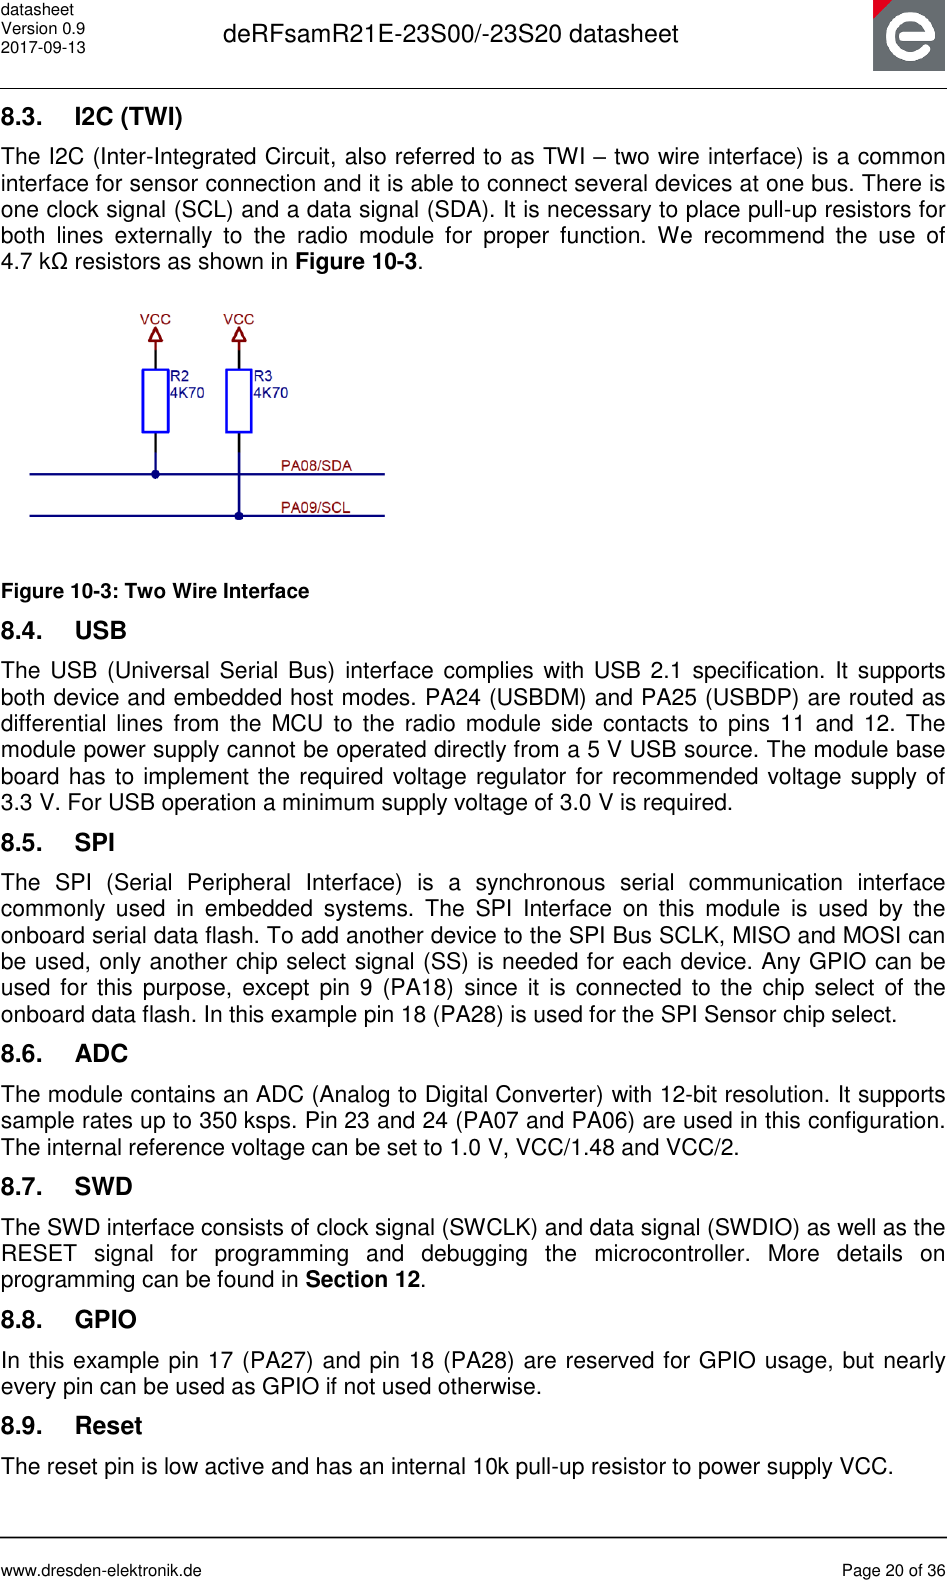 datasheet Version 0.9 2017-09-13  deRFsamR21E-23S00/-23S20 datasheet      www.dresden-elektronik.de  Page 20 of 36  8.3.  I2C (TWI) The I2C (Inter-Integrated Circuit, also referred to as TWI – two wire interface) is a common interface for sensor connection and it is able to connect several devices at one bus. There is one clock signal (SCL) and a data signal (SDA). It is necessary to place pull-up resistors for both  lines  externally  to  the  radio  module  for  proper  function.  We  recommend  the  use  of 4.7 kΩ resistors as shown in Figure 10-3.  Figure 10-3: Two Wire Interface 8.4.  USB The USB (Universal Serial Bus)  interface complies with USB 2.1 specification. It supports both device and embedded host modes. PA24 (USBDM) and PA25 (USBDP) are routed as differential lines from the  MCU to  the  radio module  side contacts  to  pins 11  and  12.  The module power supply cannot be operated directly from a 5 V USB source. The module base board has to implement the required voltage regulator for recommended voltage supply of 3.3 V. For USB operation a minimum supply voltage of 3.0 V is required. 8.5.  SPI The  SPI  (Serial  Peripheral  Interface)  is a  synchronous  serial  communication  interface commonly  used  in  embedded  systems.  The  SPI  Interface  on  this  module  is  used  by  the onboard serial data flash. To add another device to the SPI Bus SCLK, MISO and MOSI can be used, only another chip select signal (SS) is needed for each device. Any GPIO can be used for  this purpose,  except pin  9 (PA18)  since  it is  connected to  the chip  select of  the onboard data flash. In this example pin 18 (PA28) is used for the SPI Sensor chip select. 8.6.  ADC The module contains an ADC (Analog to Digital Converter) with 12-bit resolution. It supports sample rates up to 350 ksps. Pin 23 and 24 (PA07 and PA06) are used in this configuration. The internal reference voltage can be set to 1.0 V, VCC/1.48 and VCC/2. 8.7.  SWD The SWD interface consists of clock signal (SWCLK) and data signal (SWDIO) as well as the RESET  signal  for  programming  and  debugging  the  microcontroller.  More  details  on programming can be found in Section 12.  8.8.  GPIO In this example pin 17 (PA27) and pin 18 (PA28) are reserved for GPIO usage, but nearly every pin can be used as GPIO if not used otherwise. 8.9.  Reset The reset pin is low active and has an internal 10k pull-up resistor to power supply VCC.   